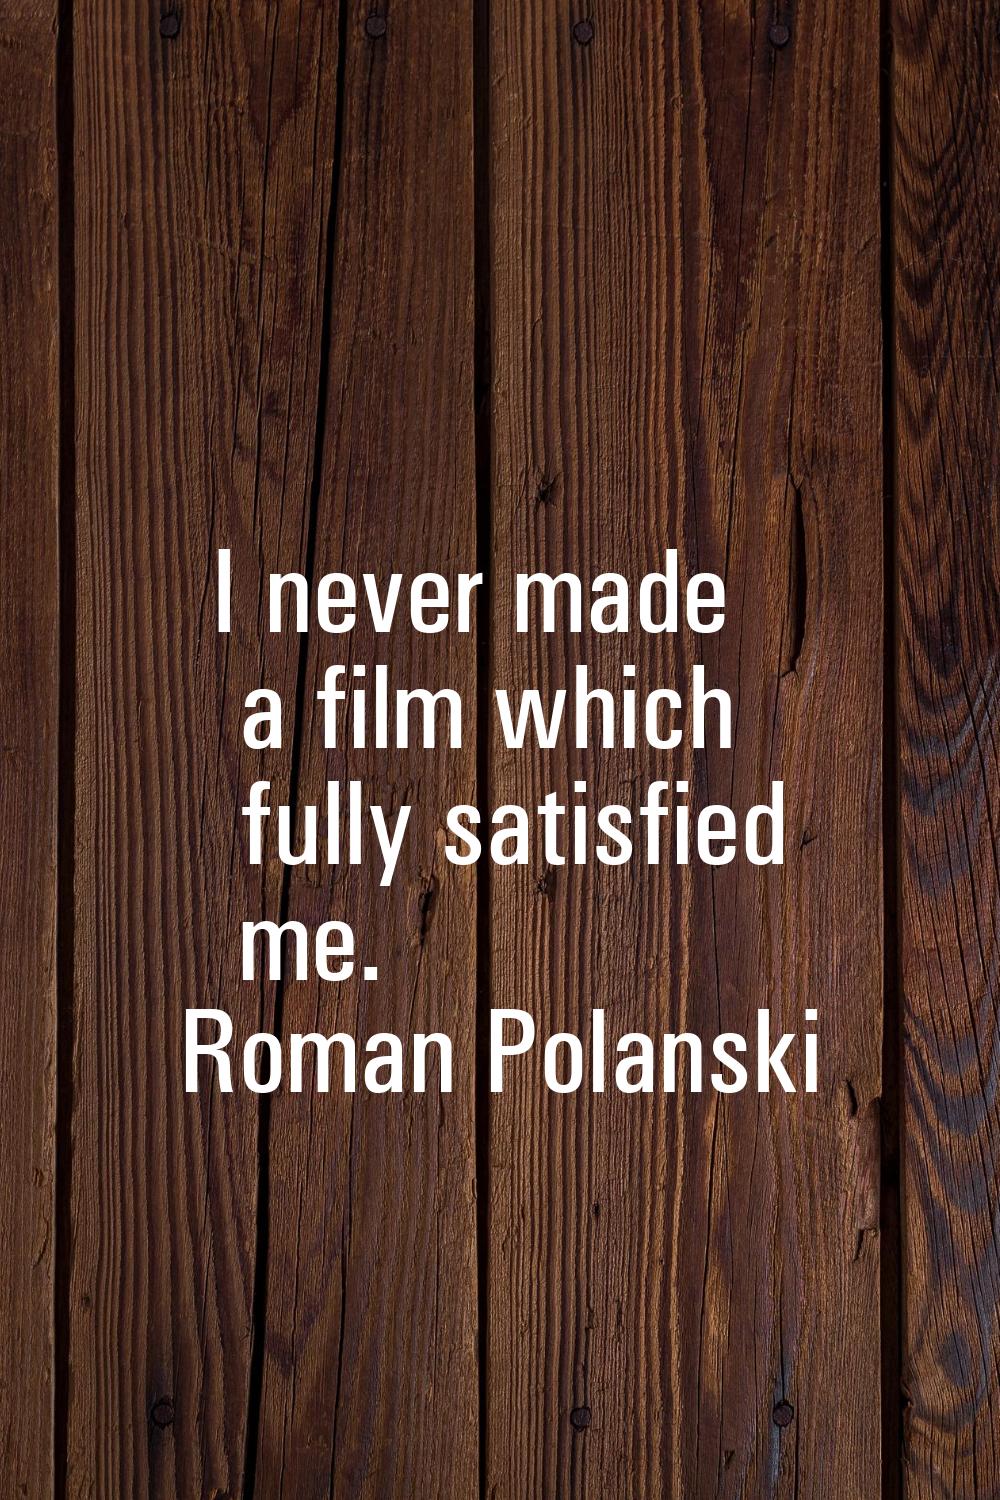 I never made a film which fully satisfied me.